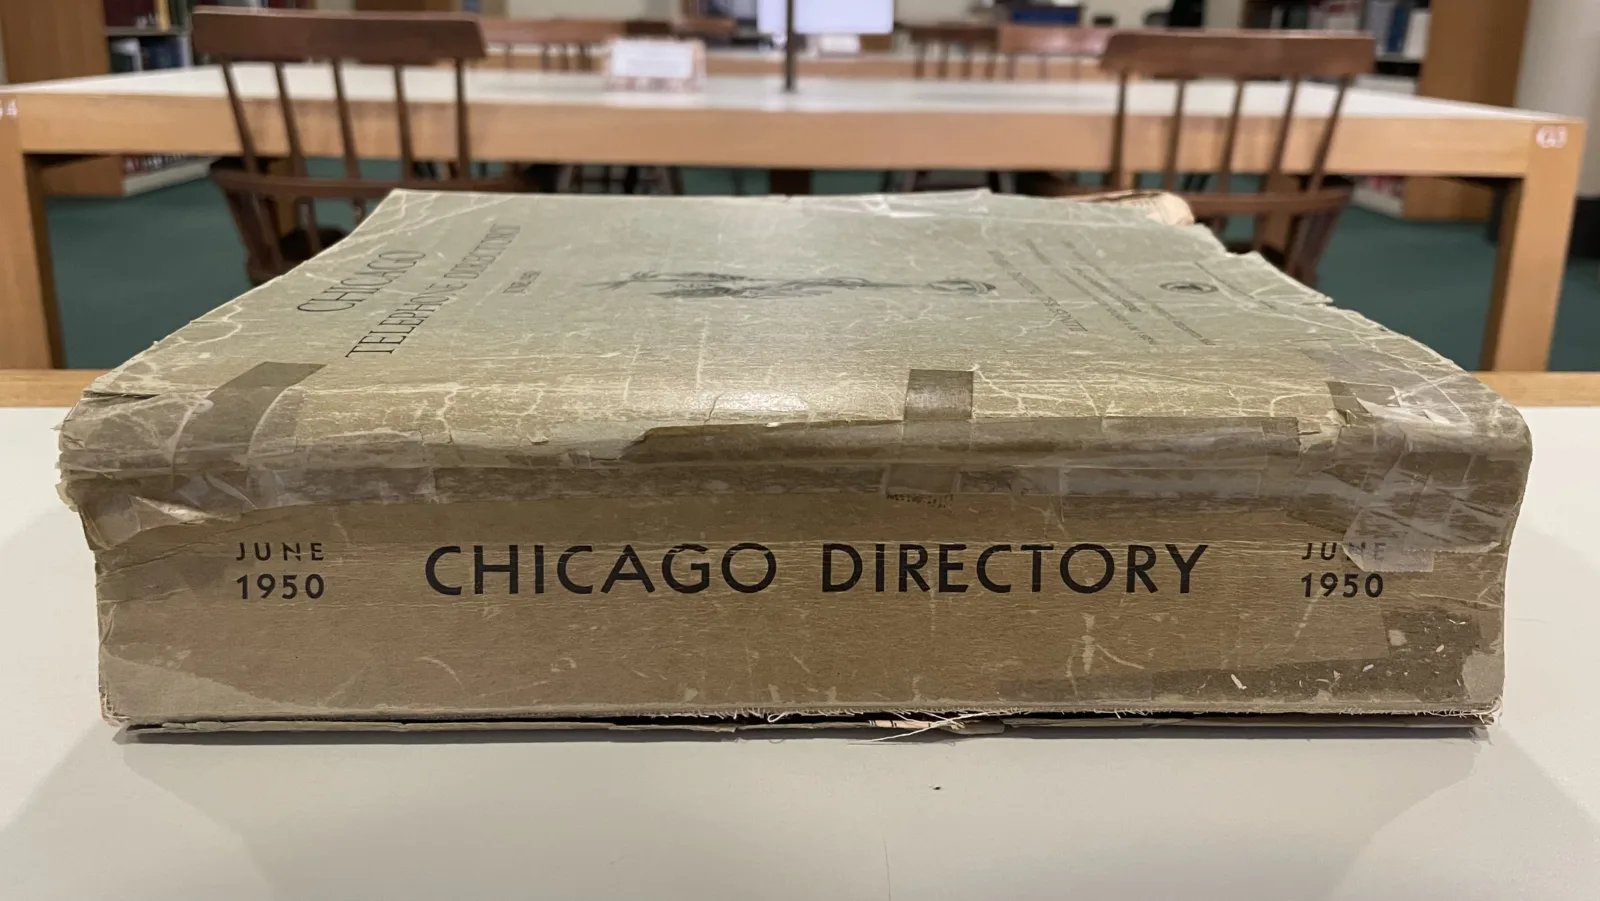 Spine of a June 1950 Chicago telephone book. The spine reads, "Chicago Directory."